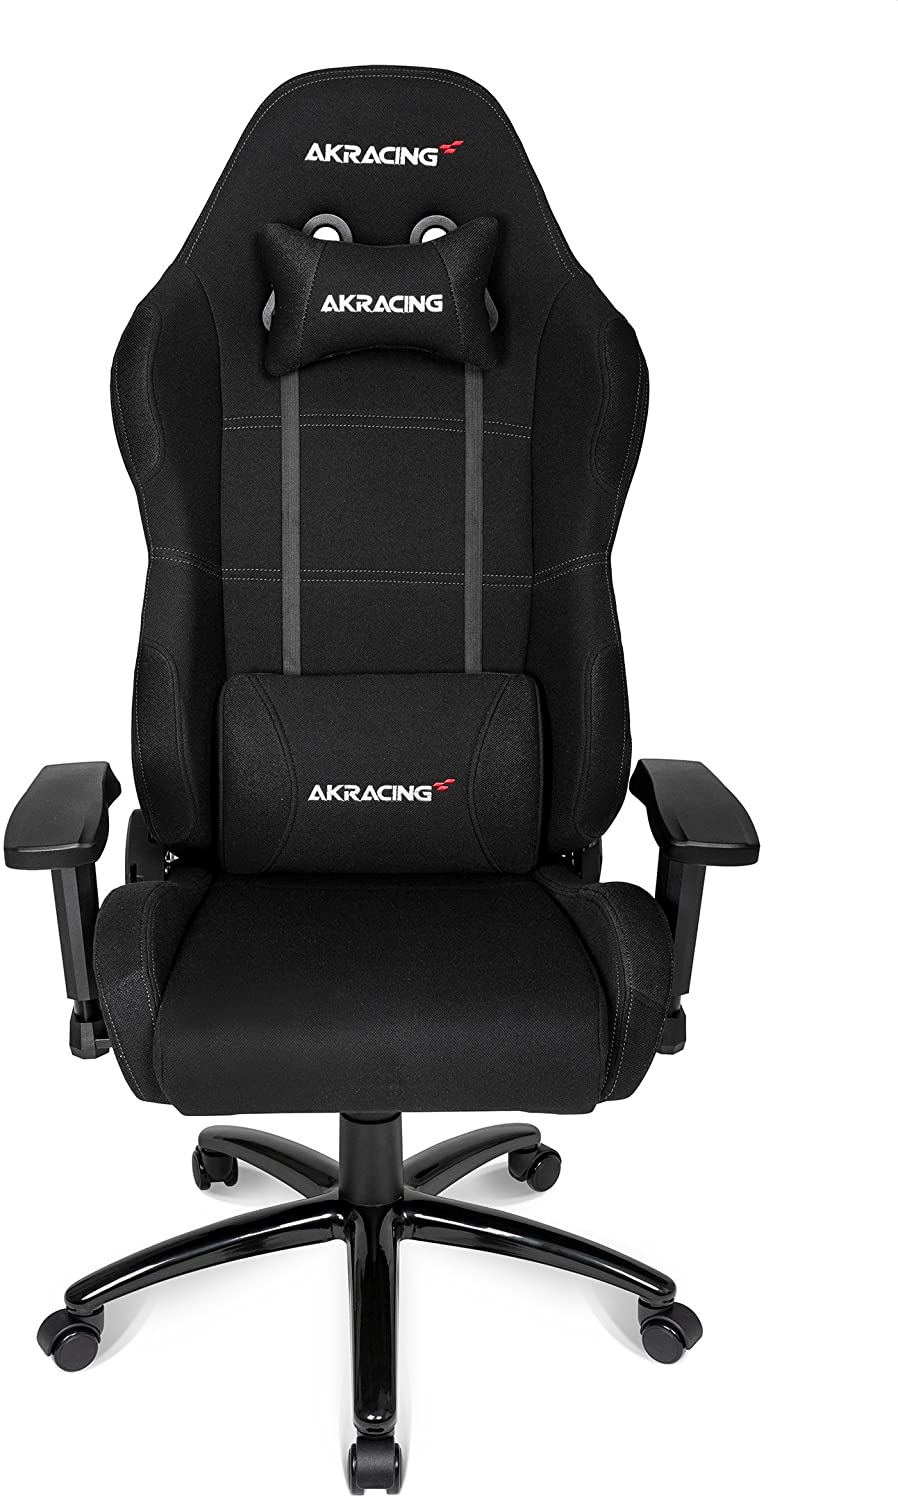 quality gaming chair - AK Racing Core Series EX Gaming Chair